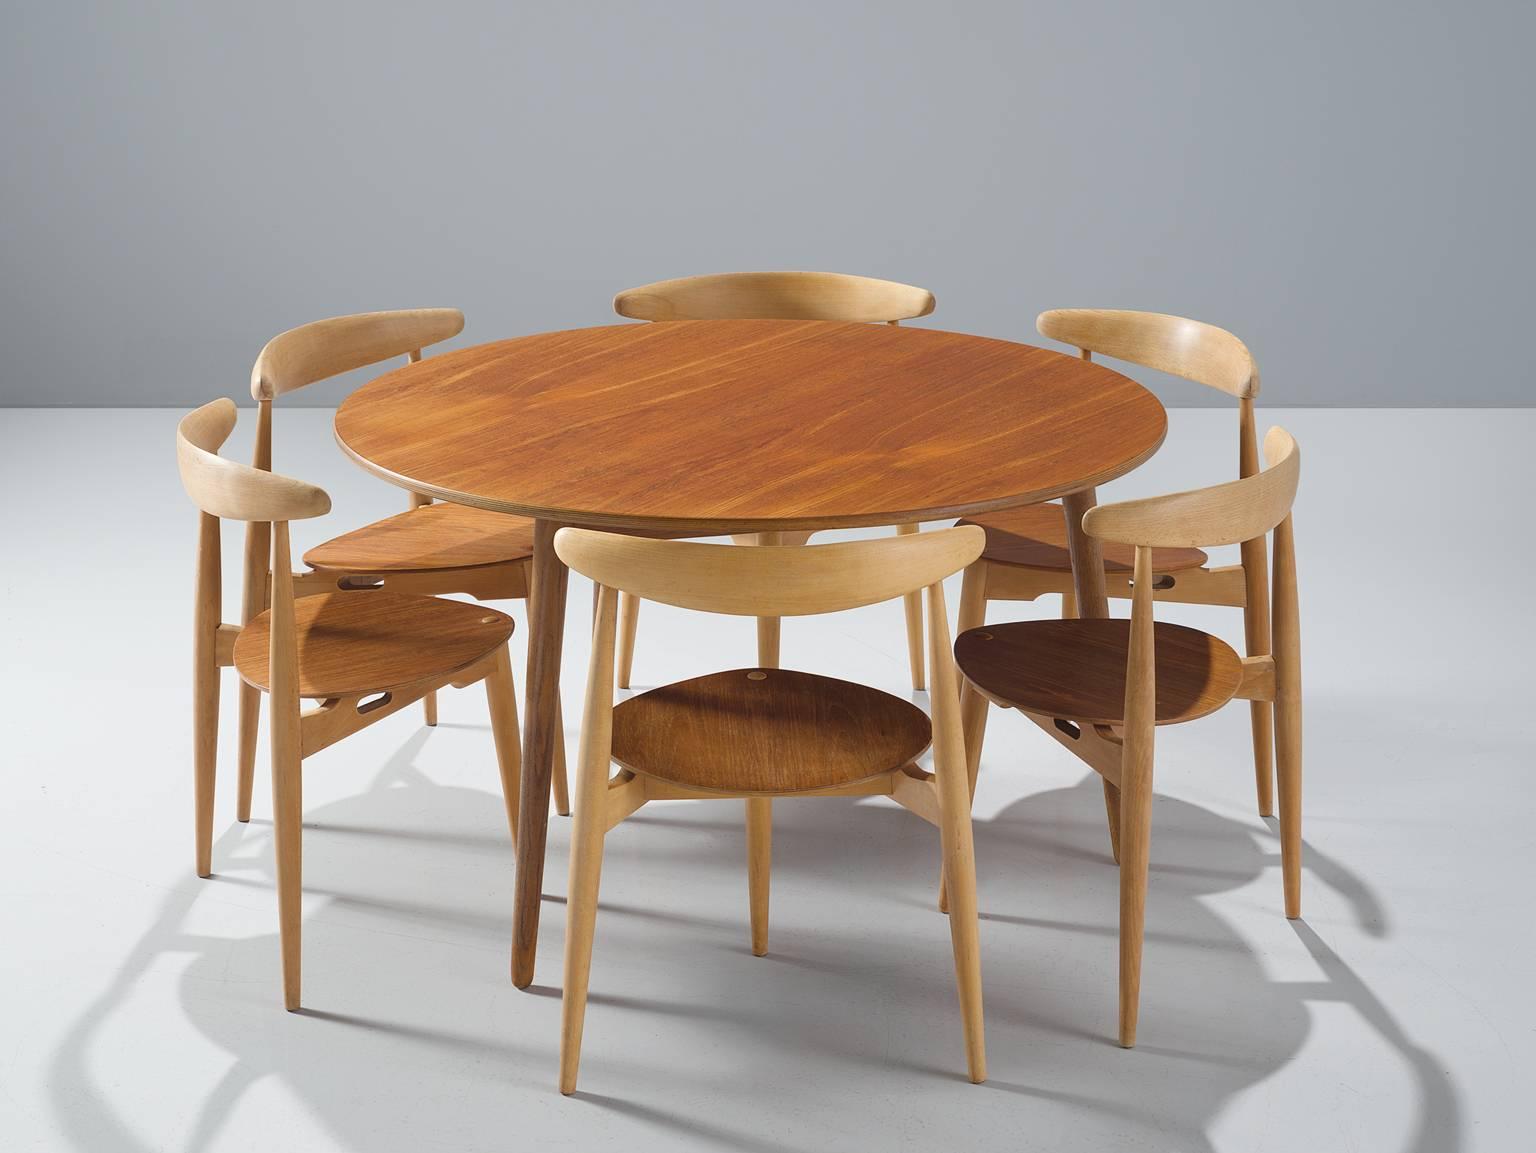 Heart set by Hans Wegner for Fritz Hansen, beech and teak, Denmark, 1953.

This set is part of the midcentury collection. The chairs by Hans Wegner are designed to sit flush against a table. The chairs have only three legs, so they can be shoved all